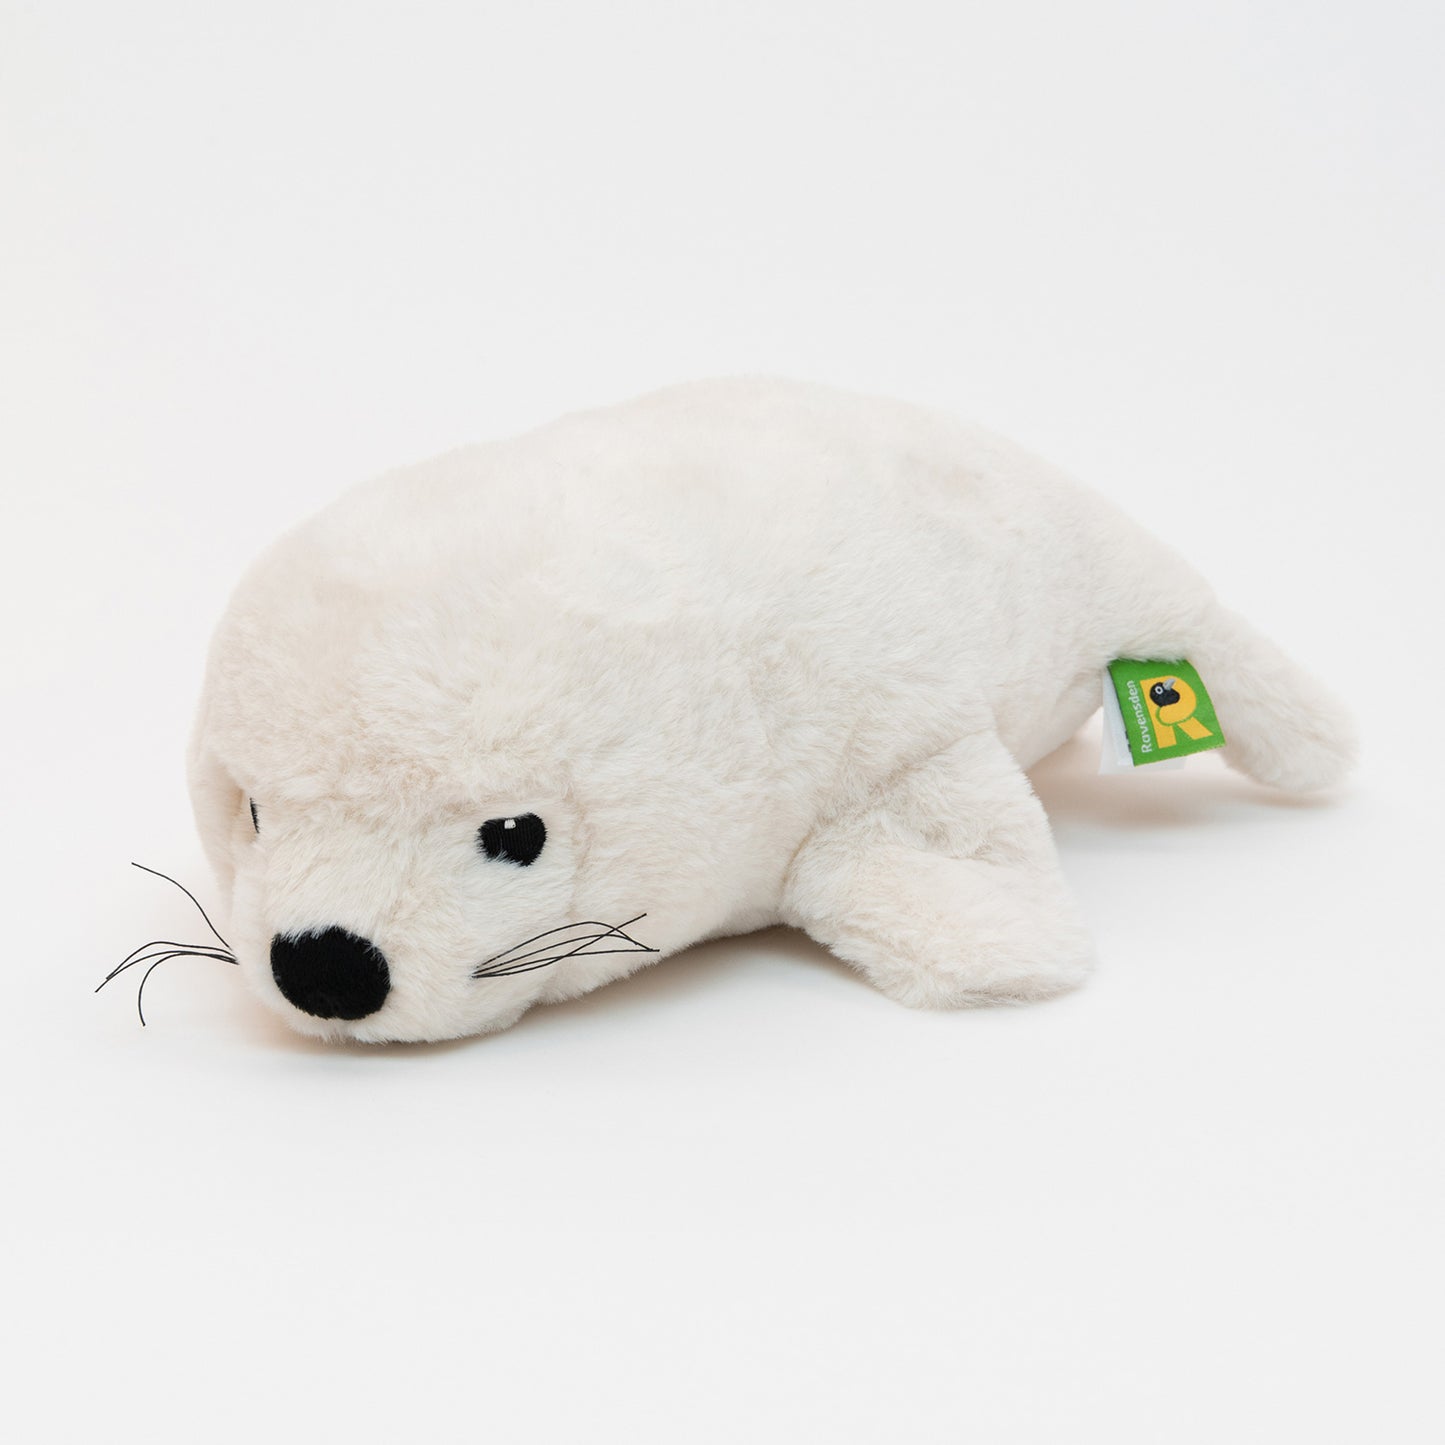 A white plush seal soft toy on a white background.